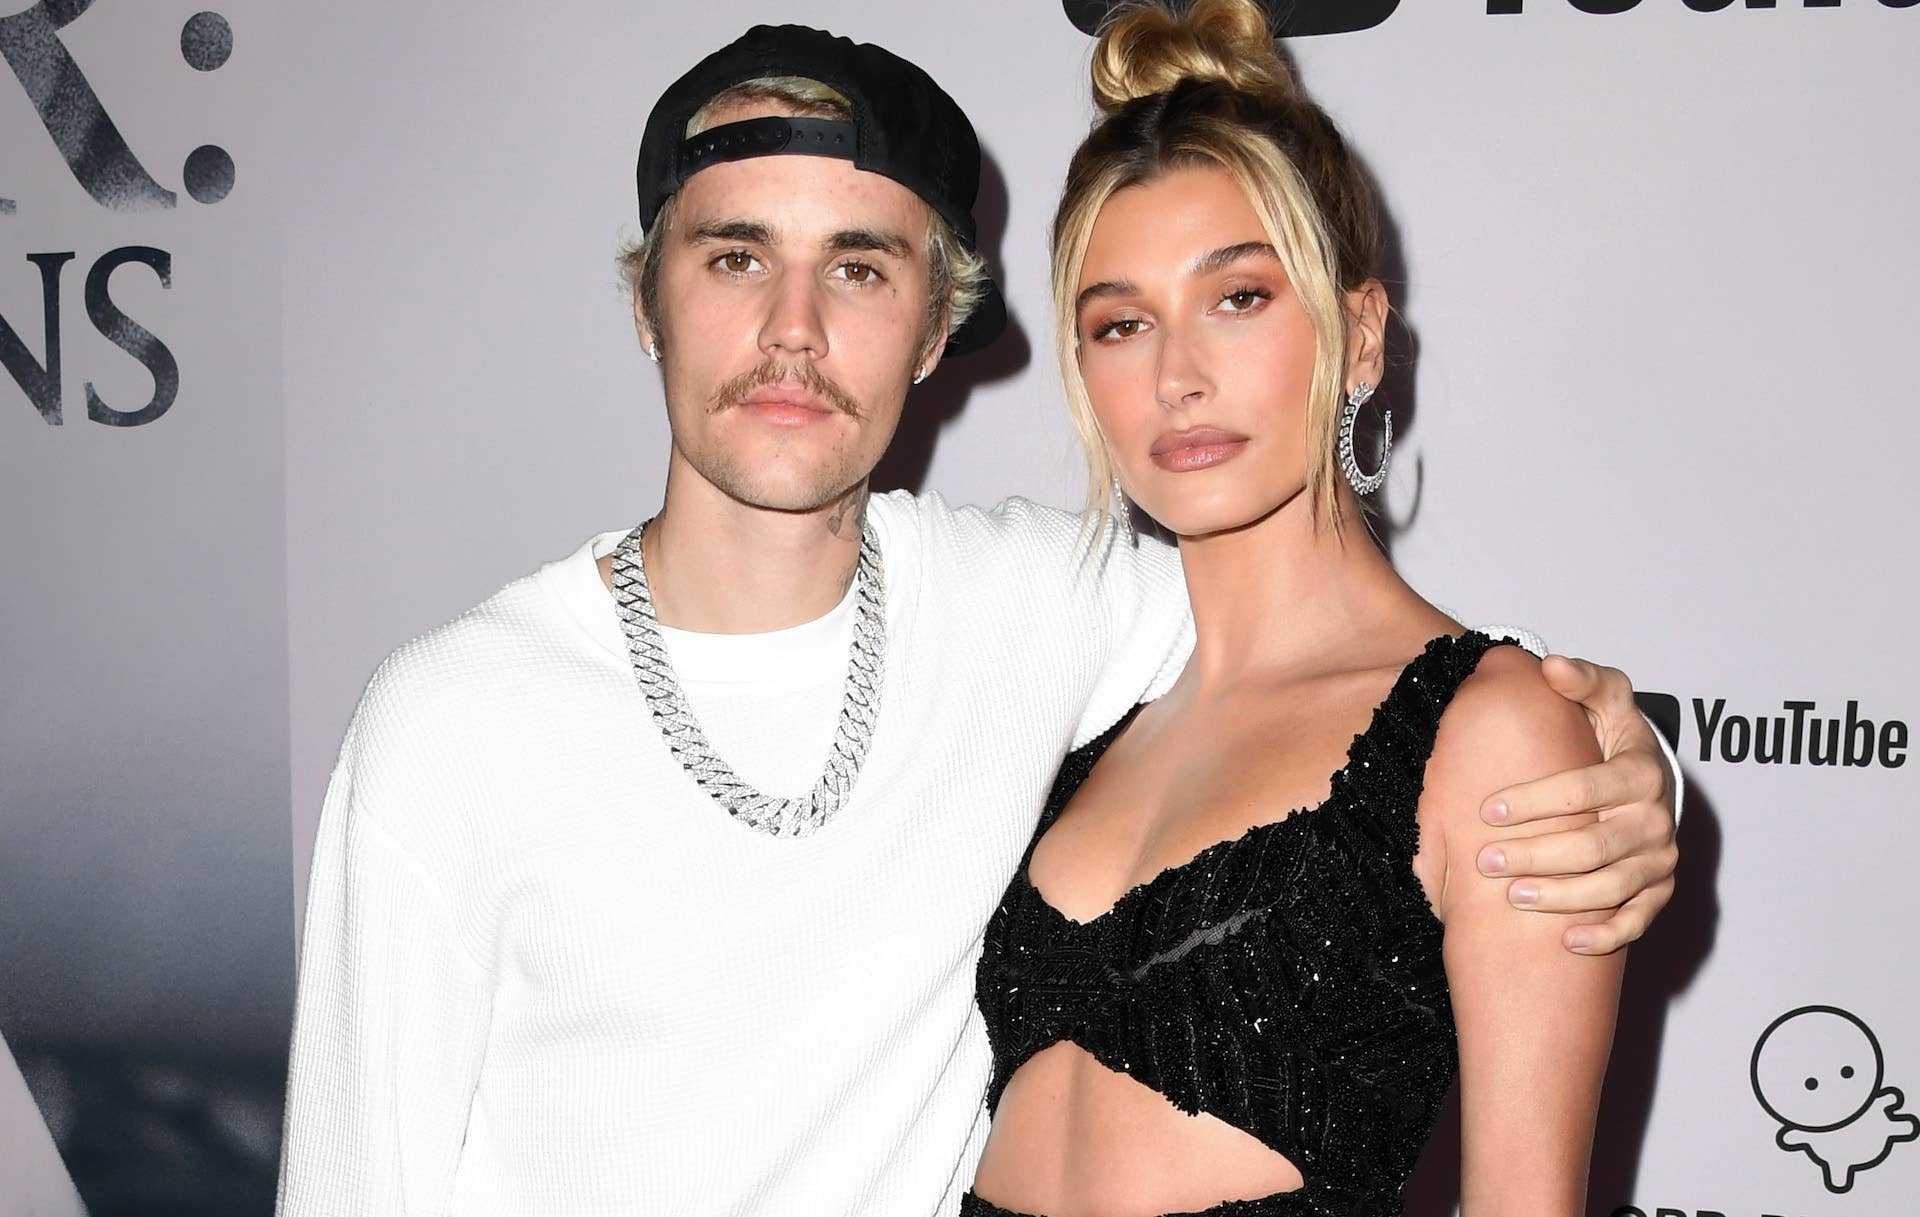 Justin Bieber and Haily Bieber's Church visit sparks rumours of trouble in their marriage